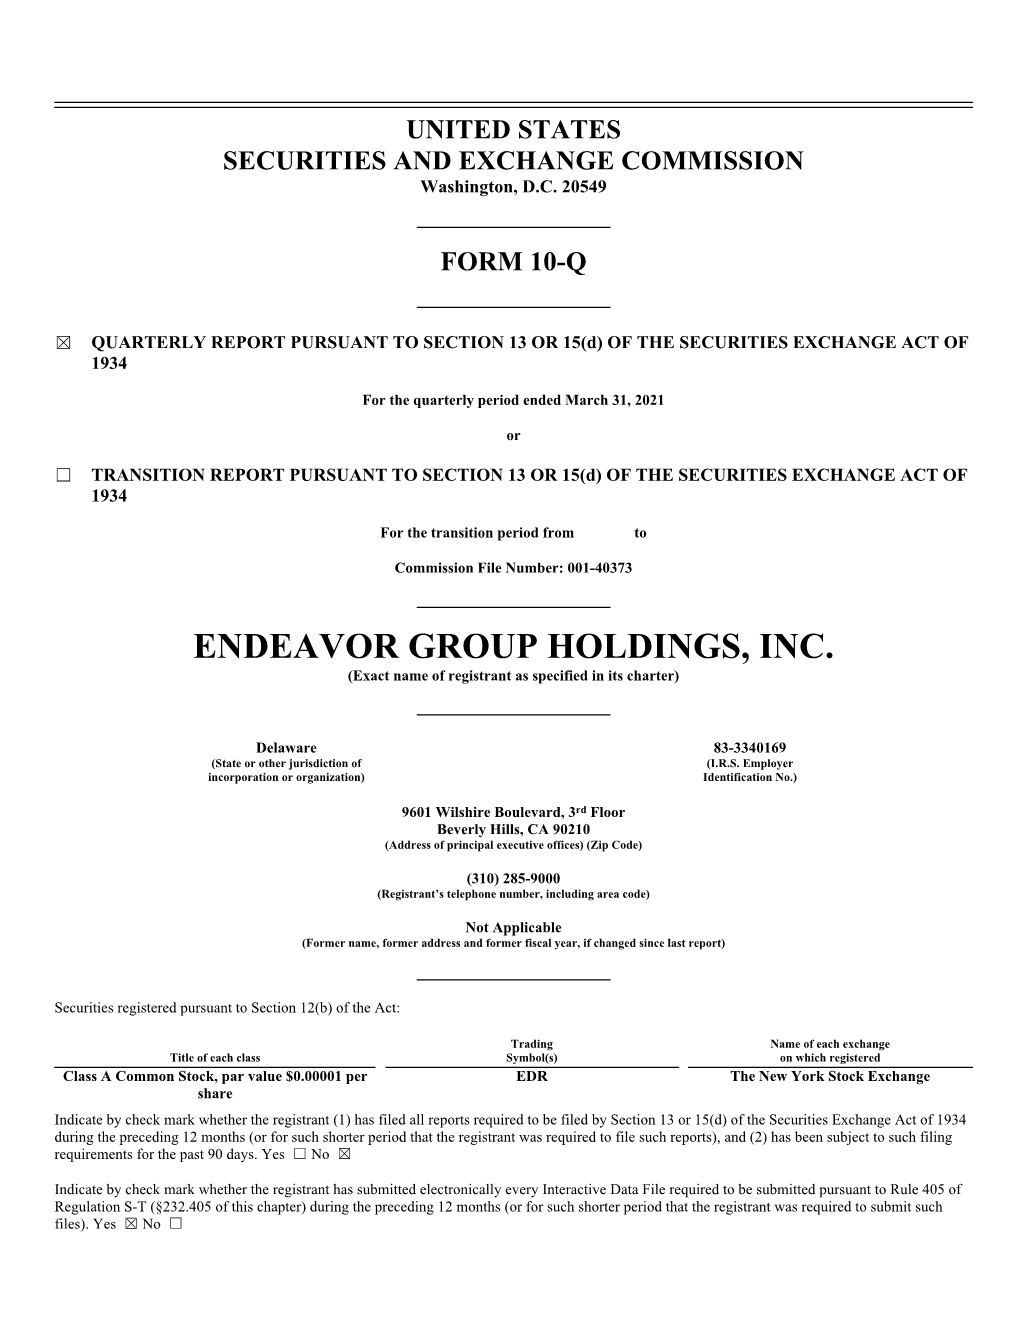 ENDEAVOR GROUP HOLDINGS, INC. (Exact Name of Registrant As Specified in Its Charter)